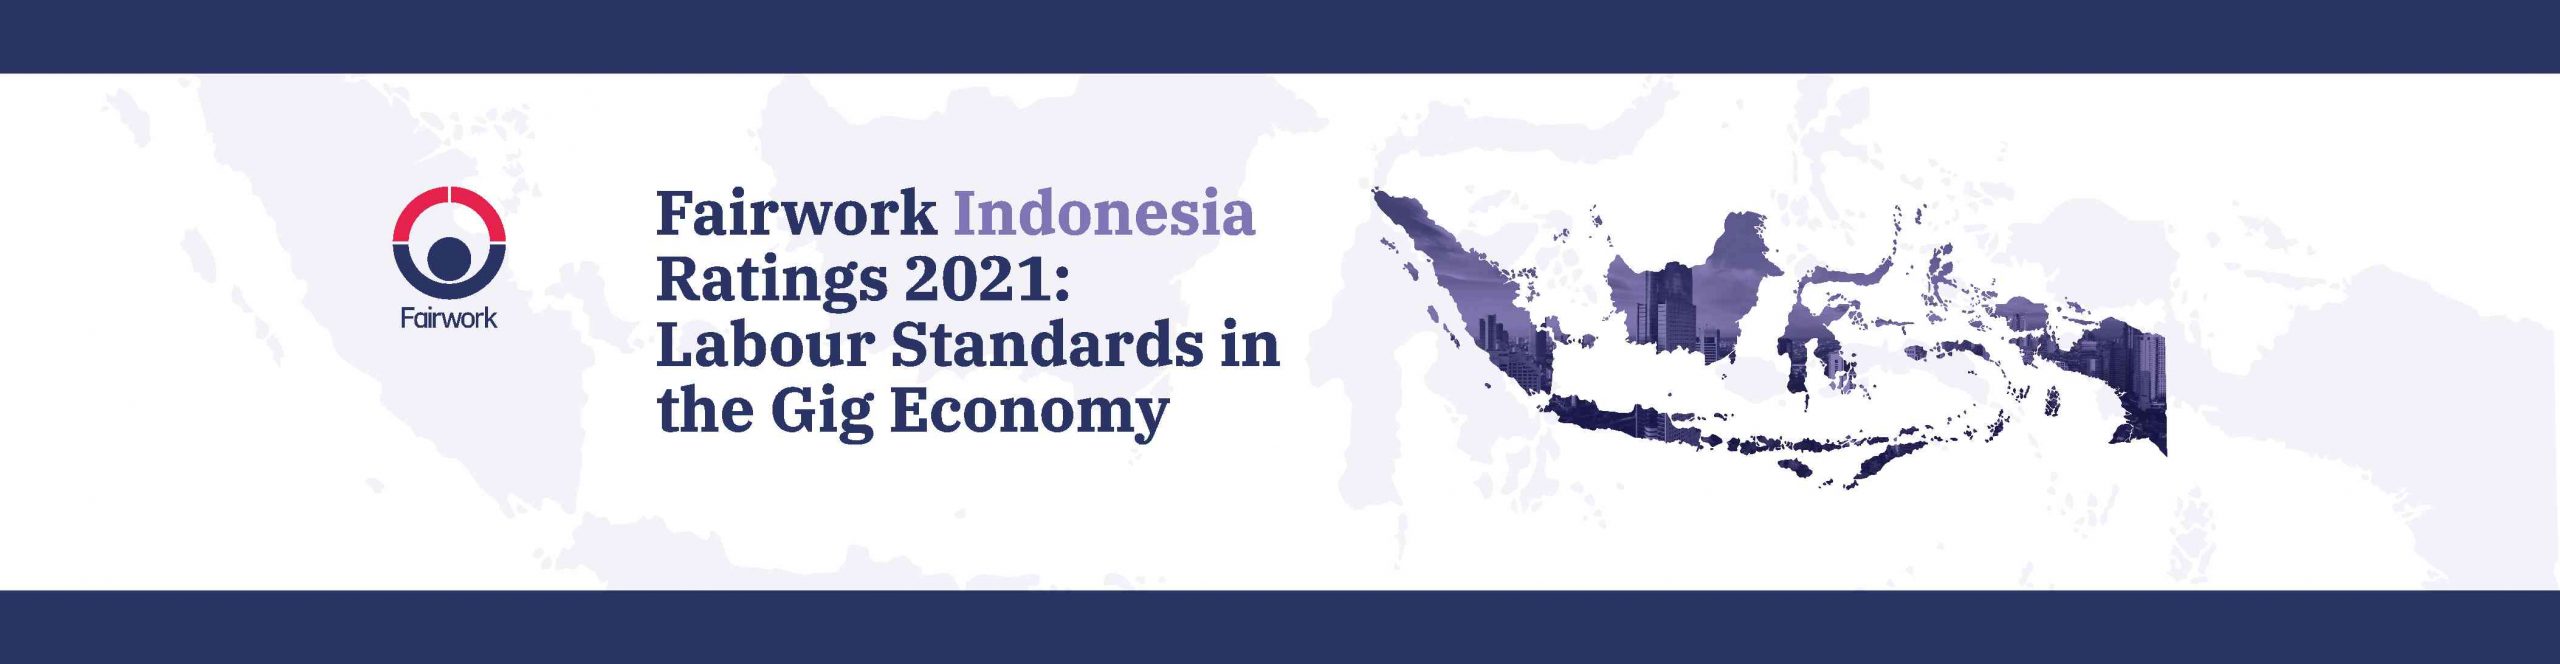 Fairwork Indonesia Ratings 2021: Labour Standards in the Gig Economy